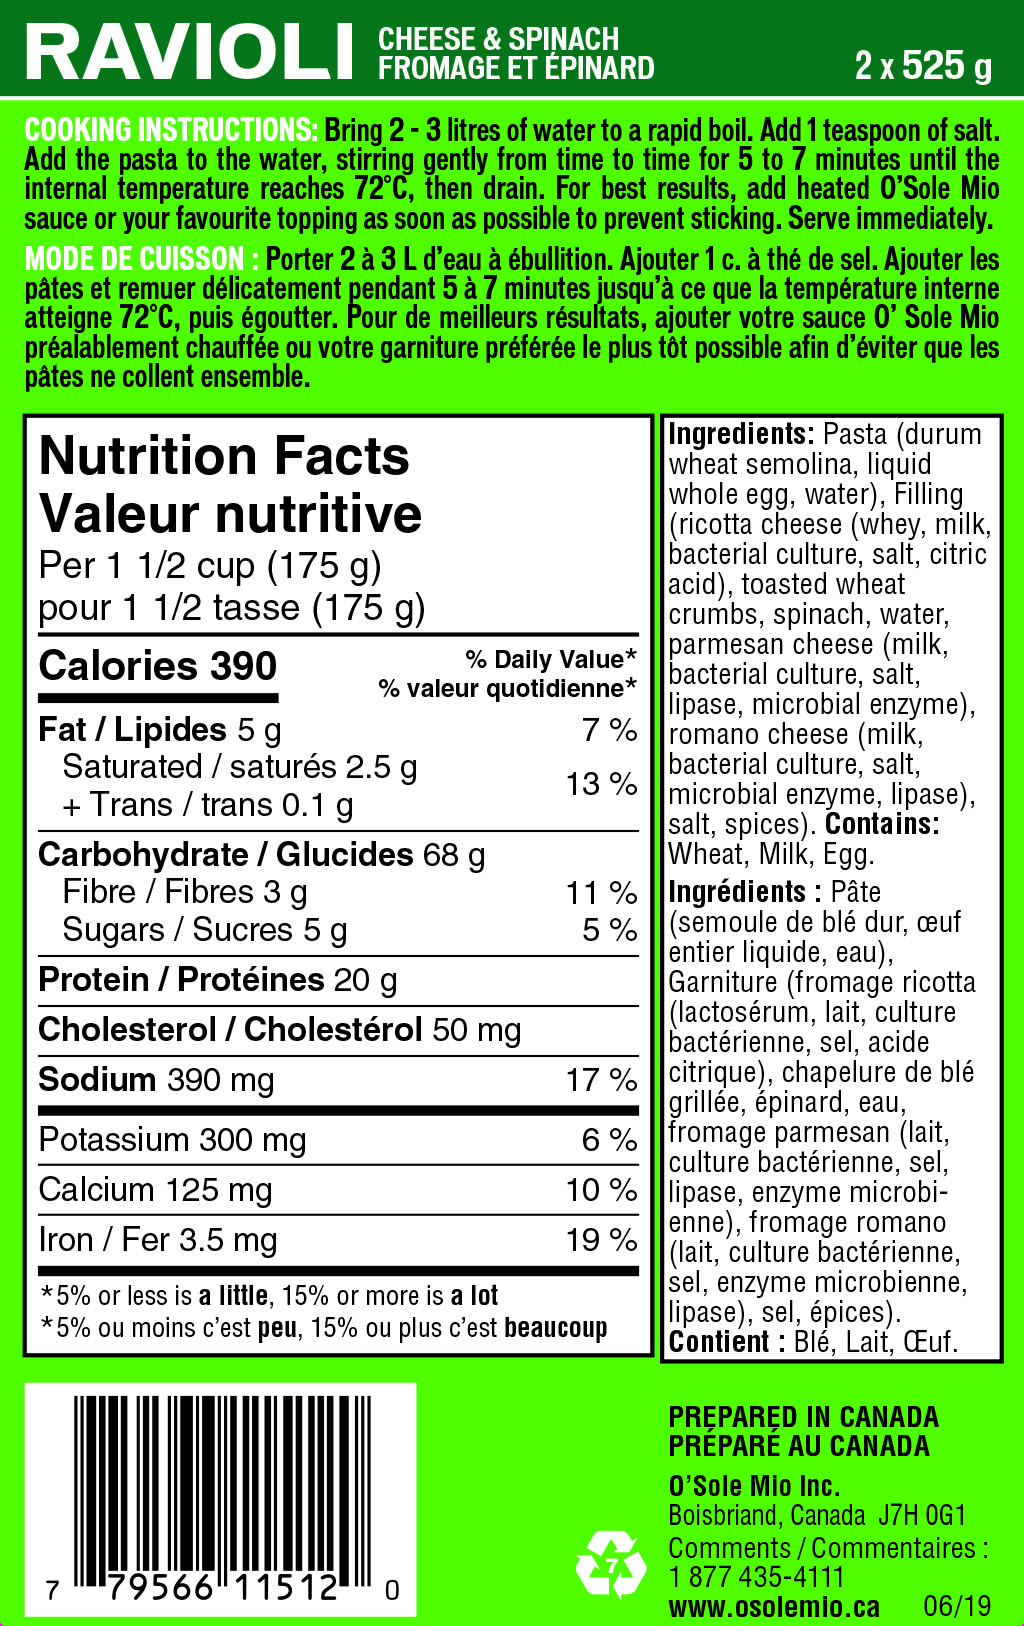 nutrition_facts_image